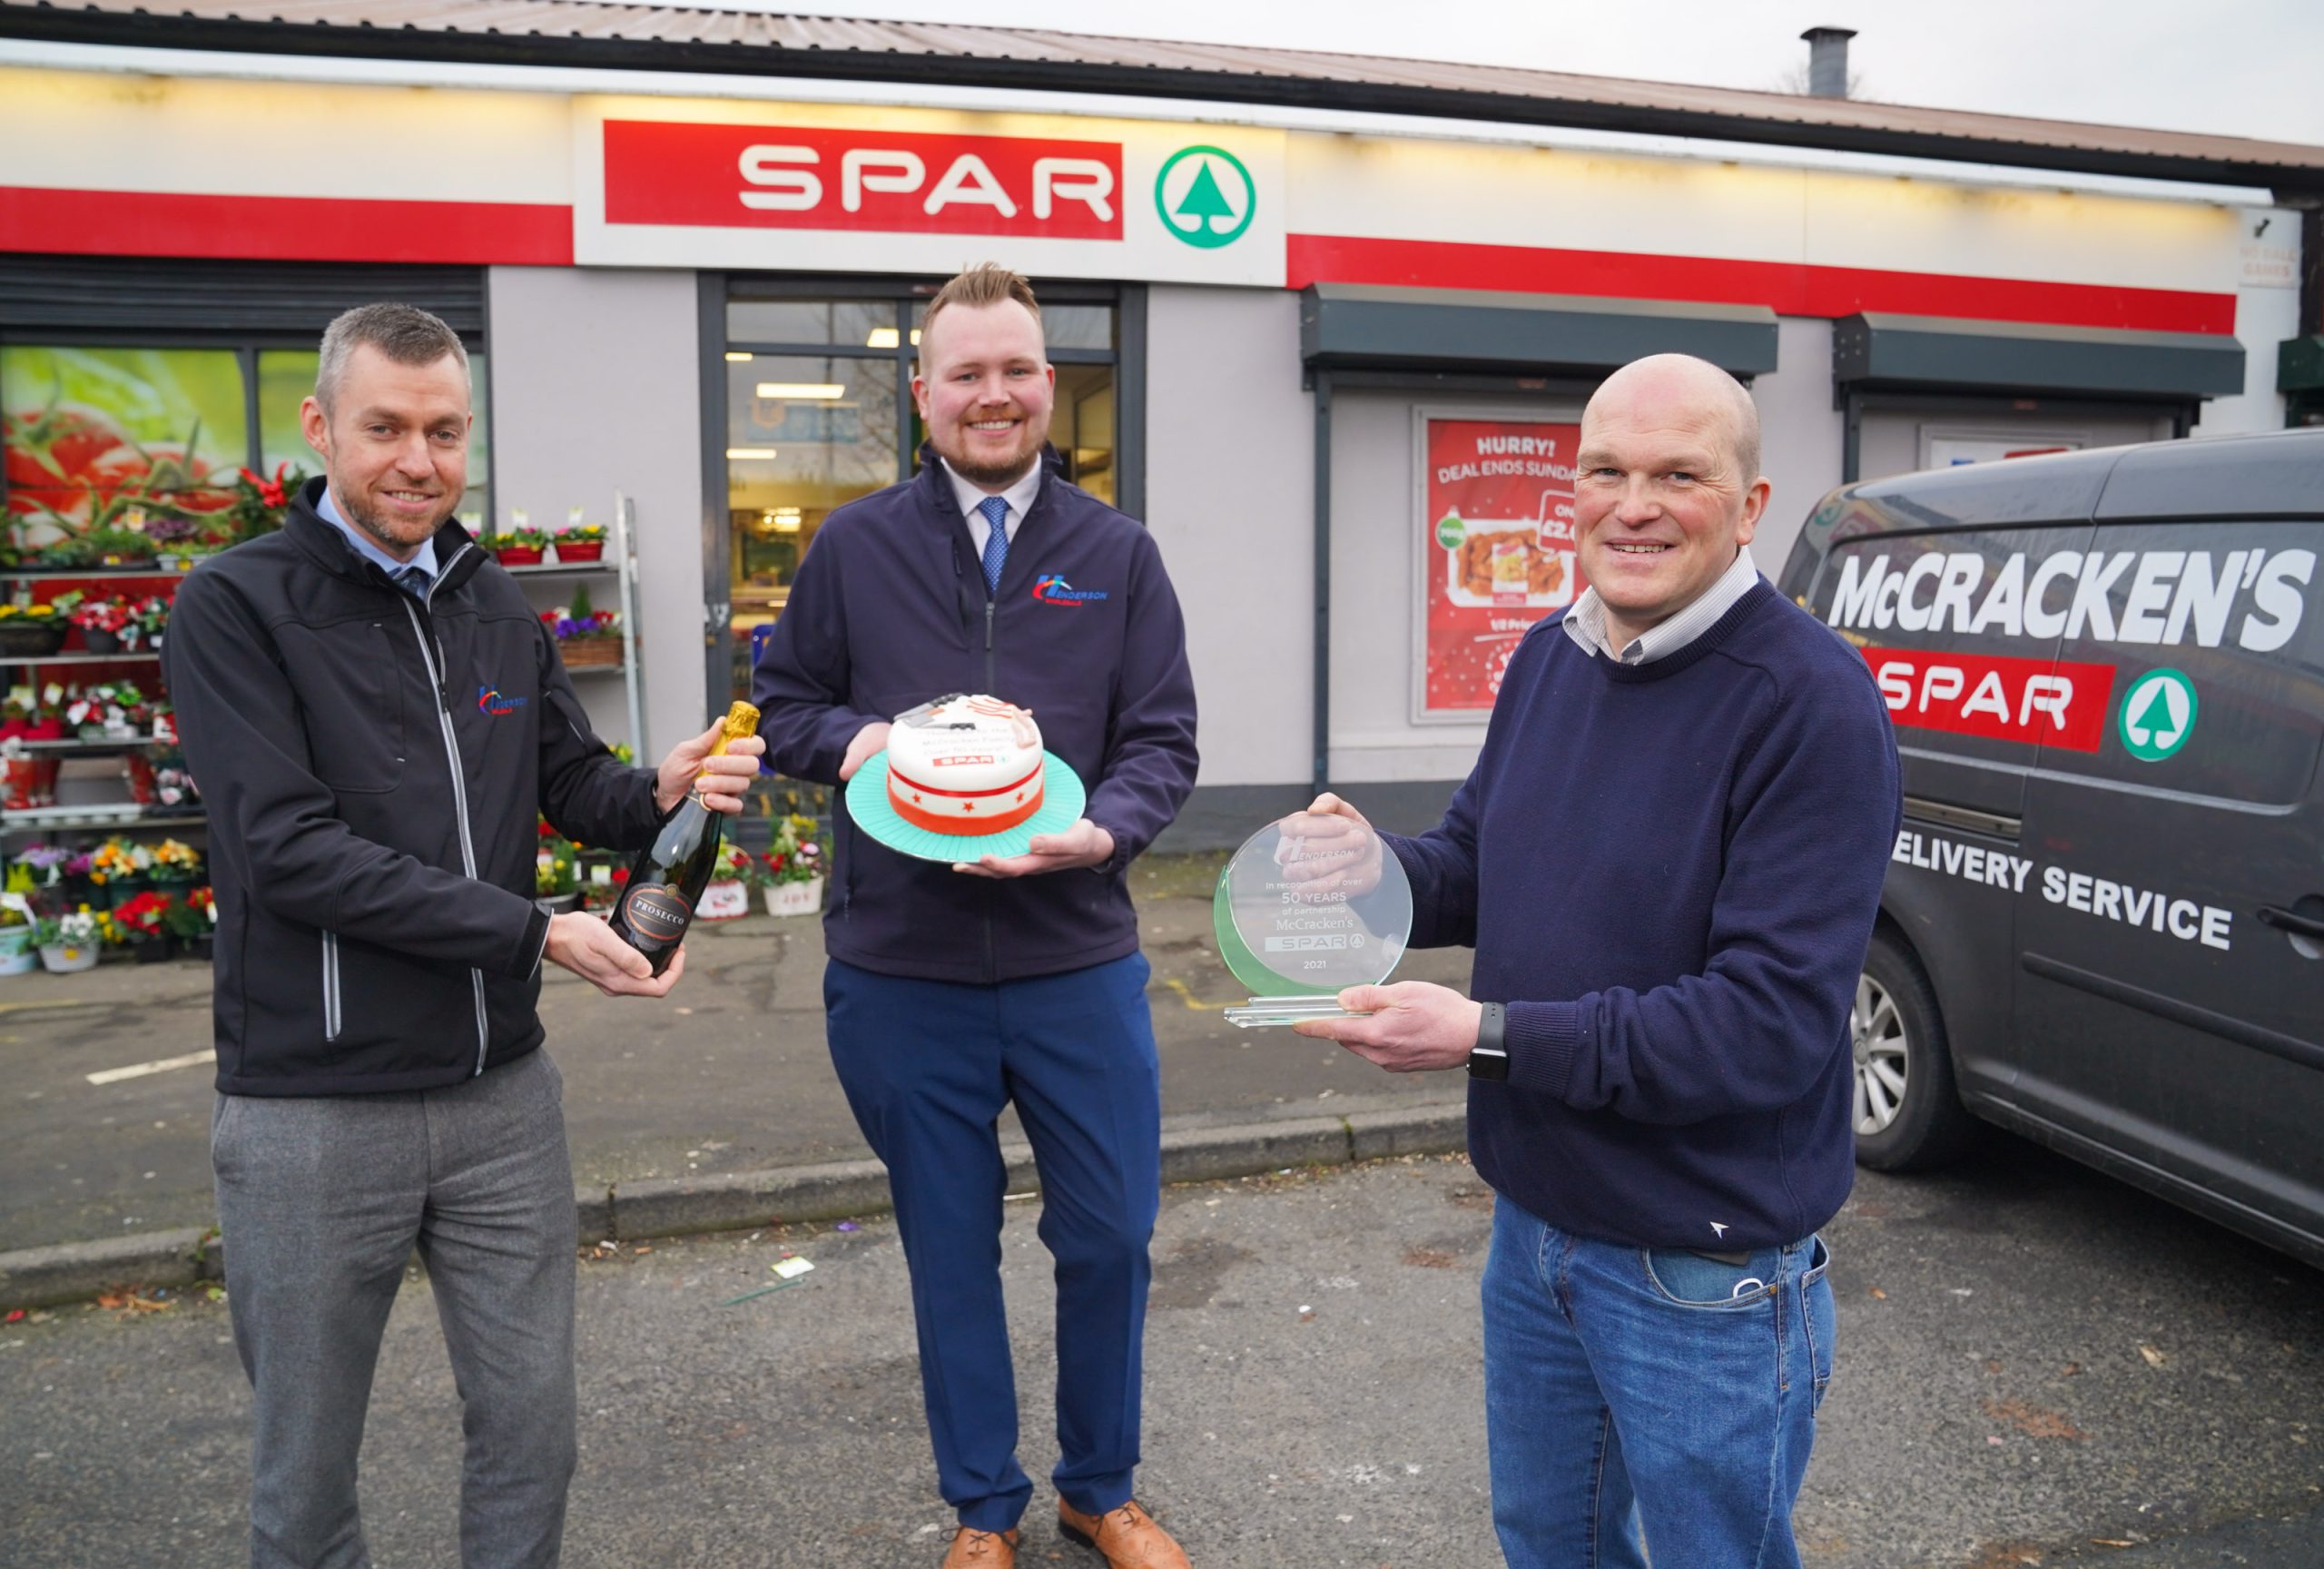 50 years of business for McCracken’s SPAR in Portadown